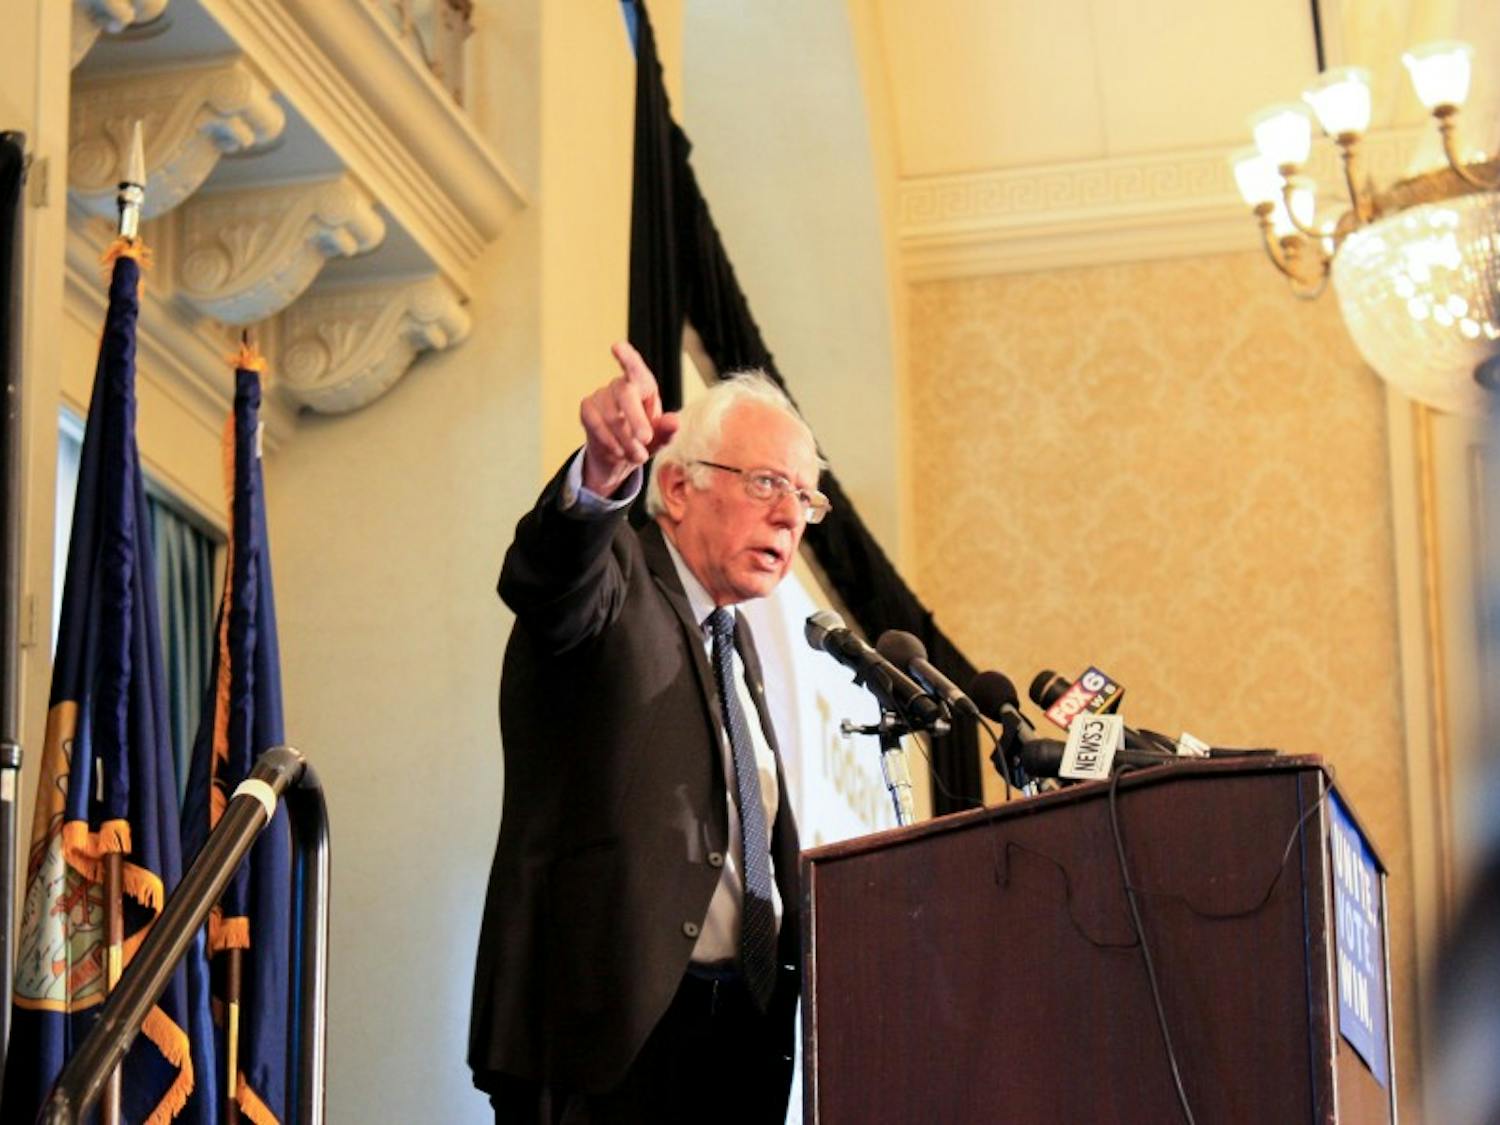 Vermont Sen. Bernie Sanders told supporters that his suspended campaign will transition into being an organization that promotes various progressive causes.